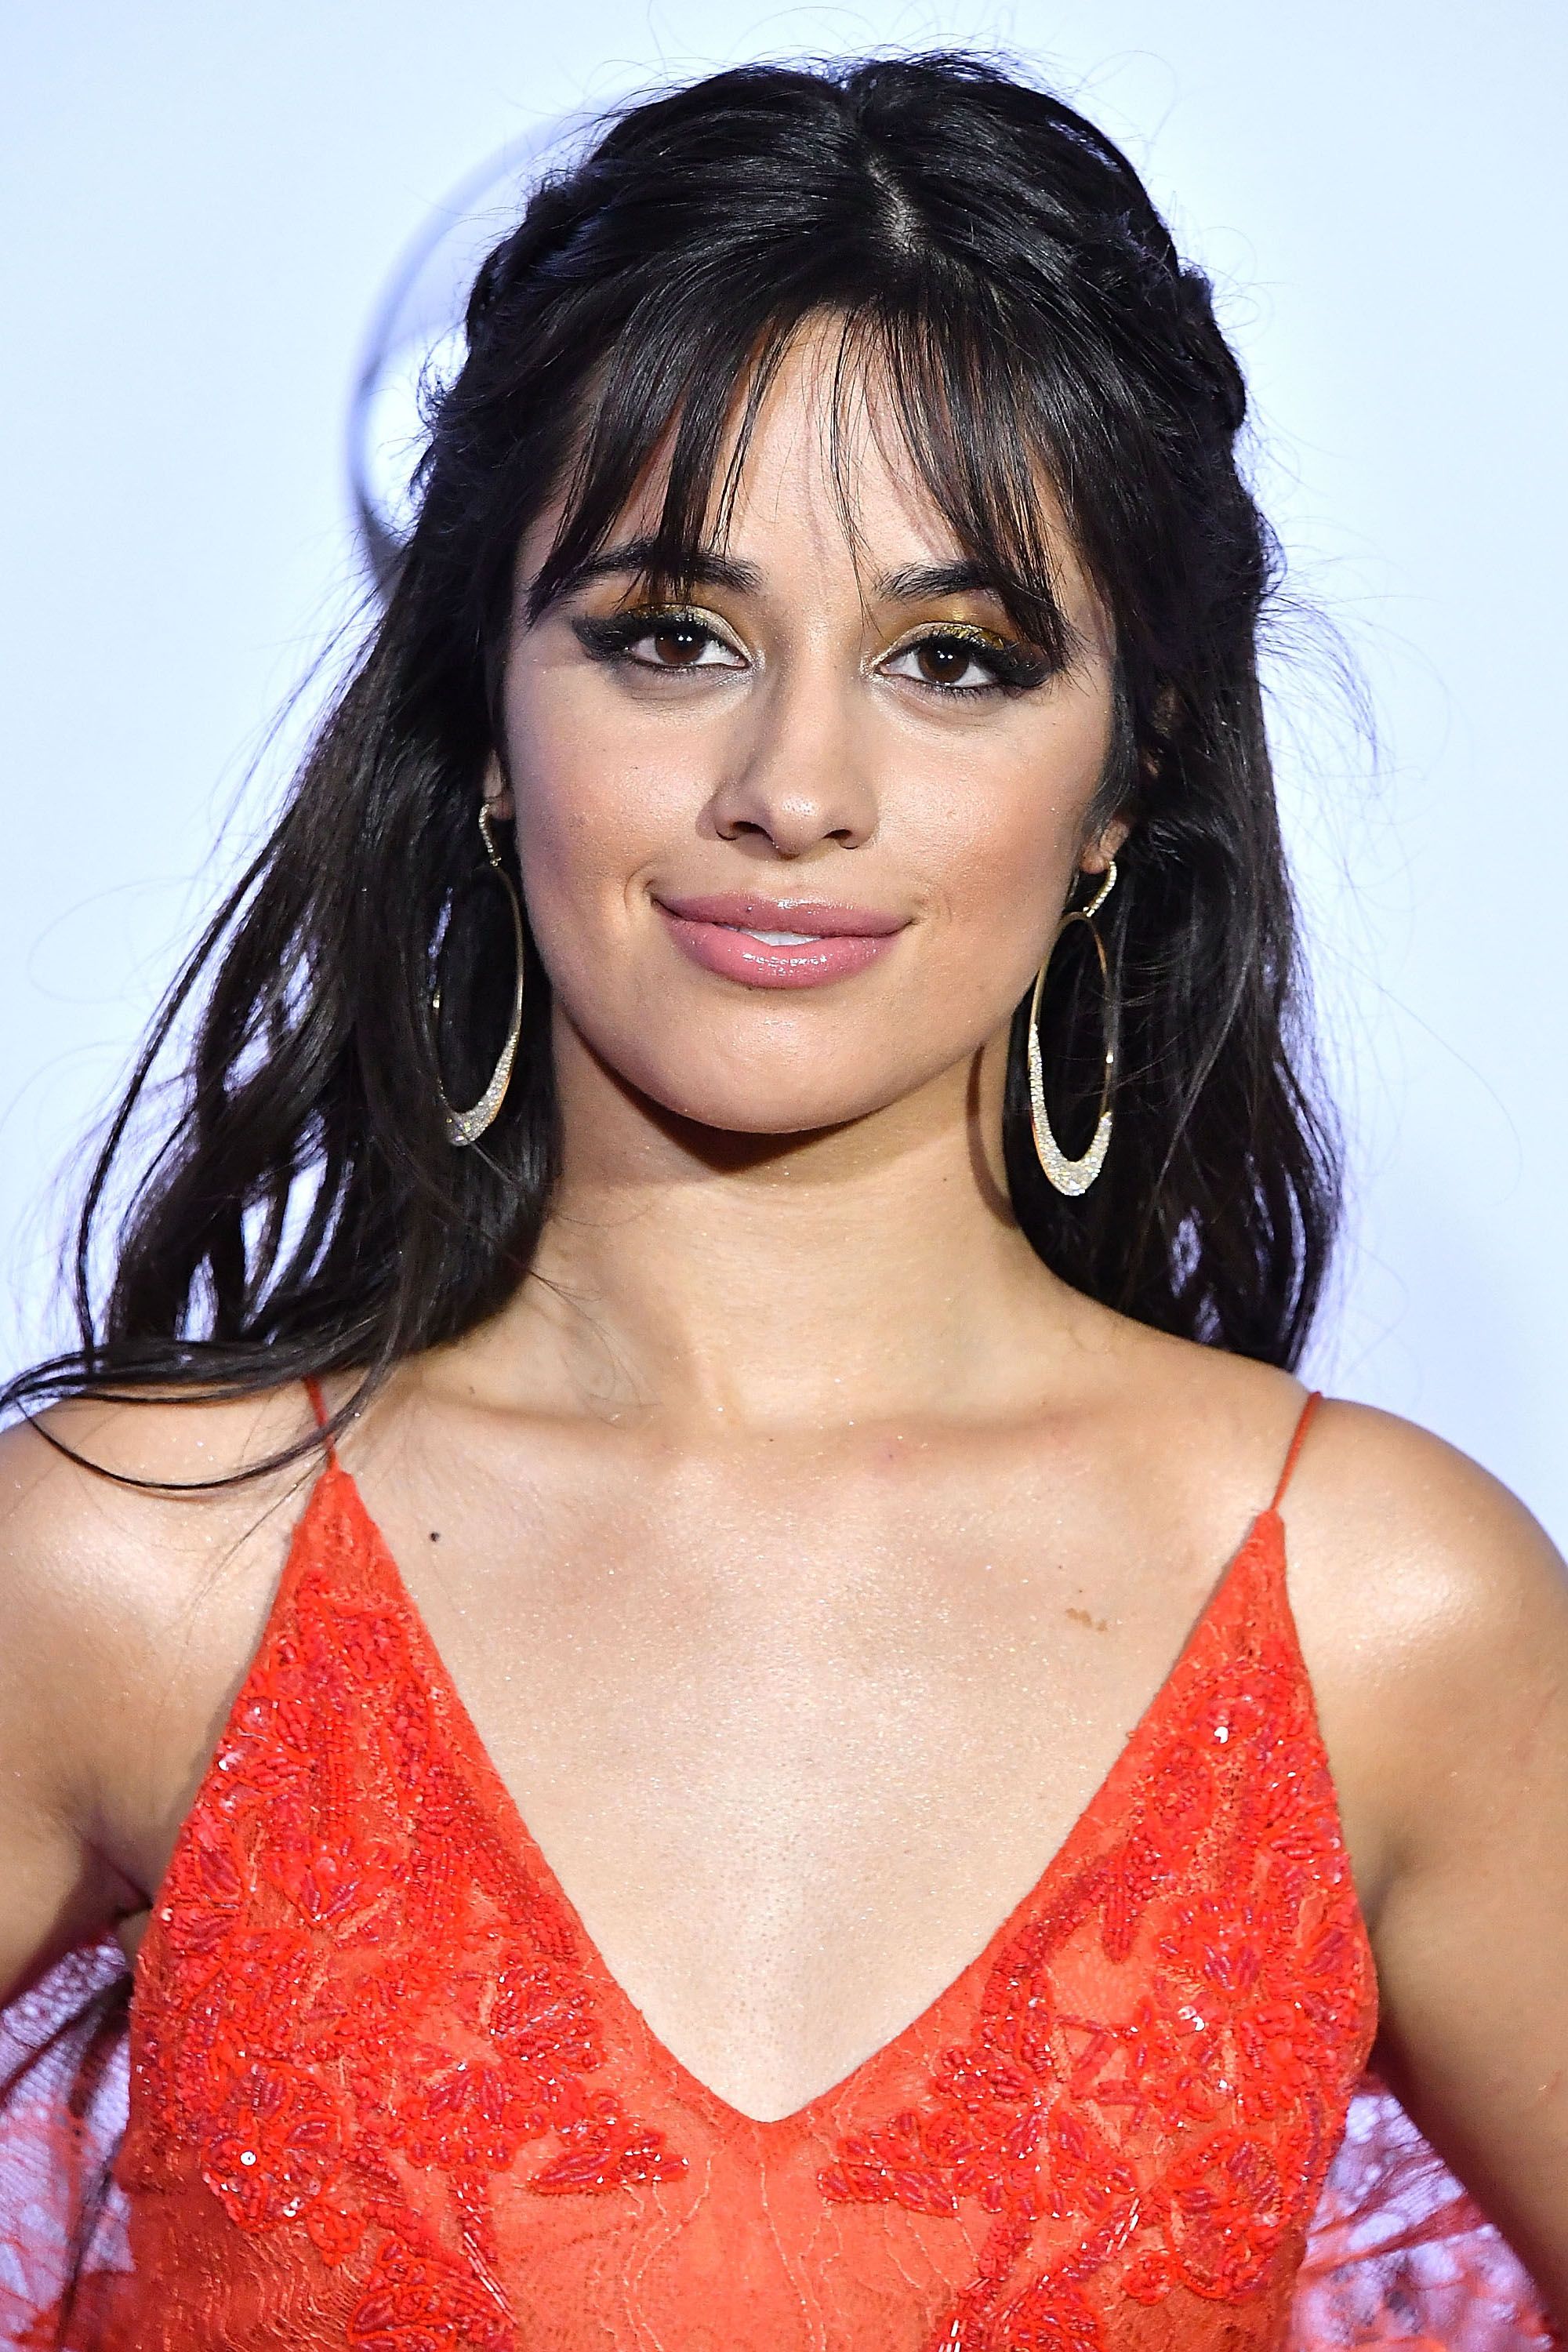 Camila Cabello unveils 80s mullet hairstyle and it's giving Miley Cyrus  vibes - OK! Magazine